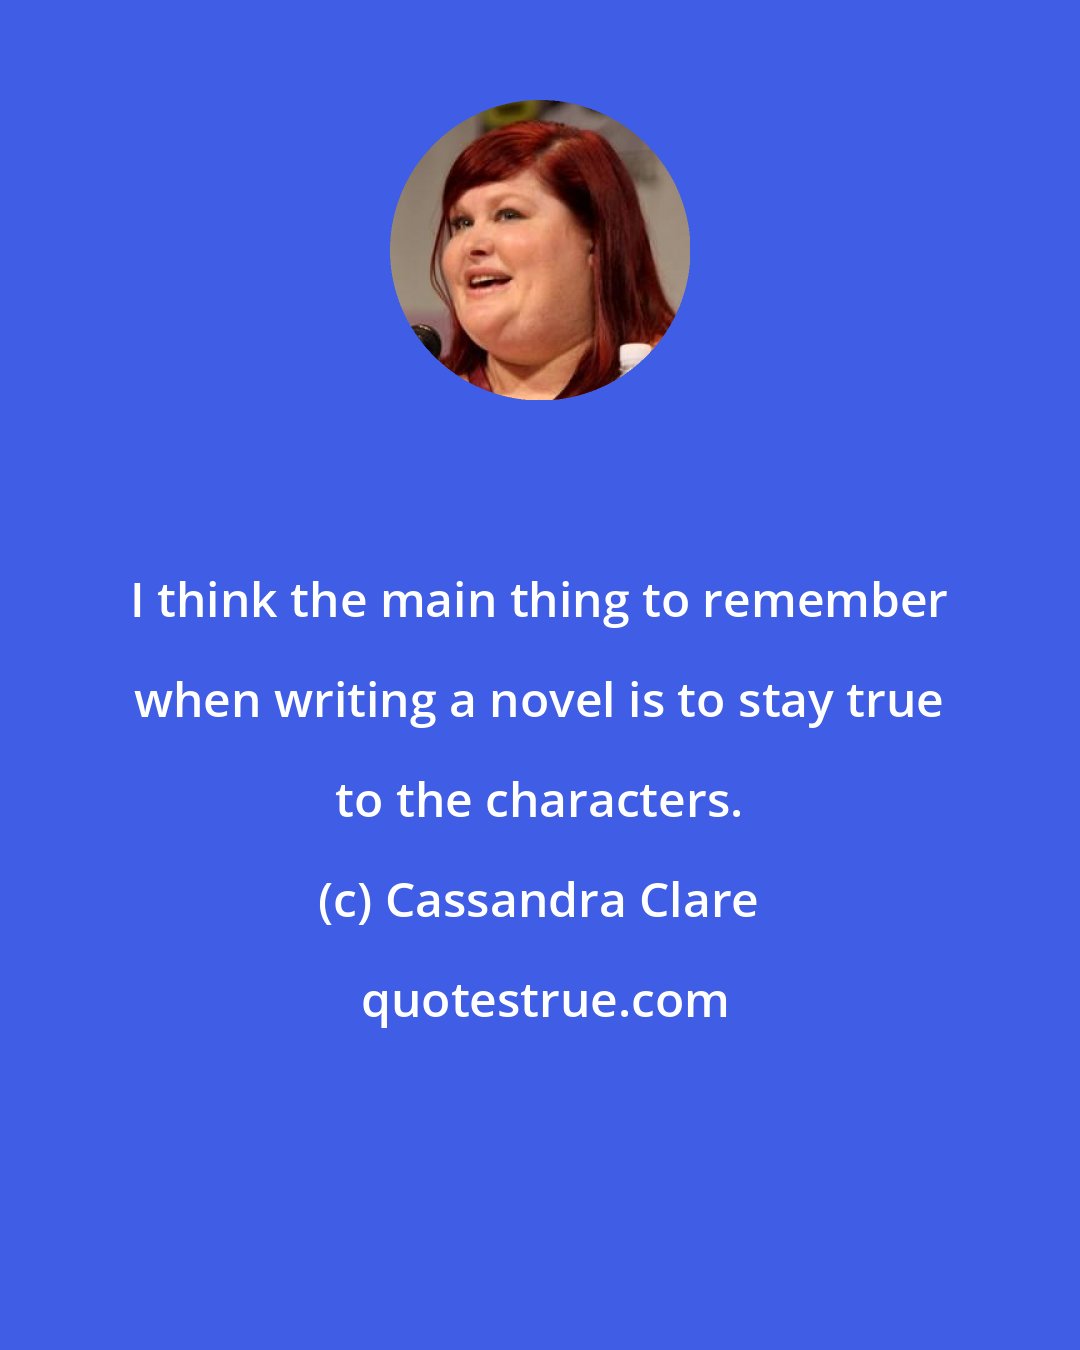 Cassandra Clare: I think the main thing to remember when writing a novel is to stay true to the characters.